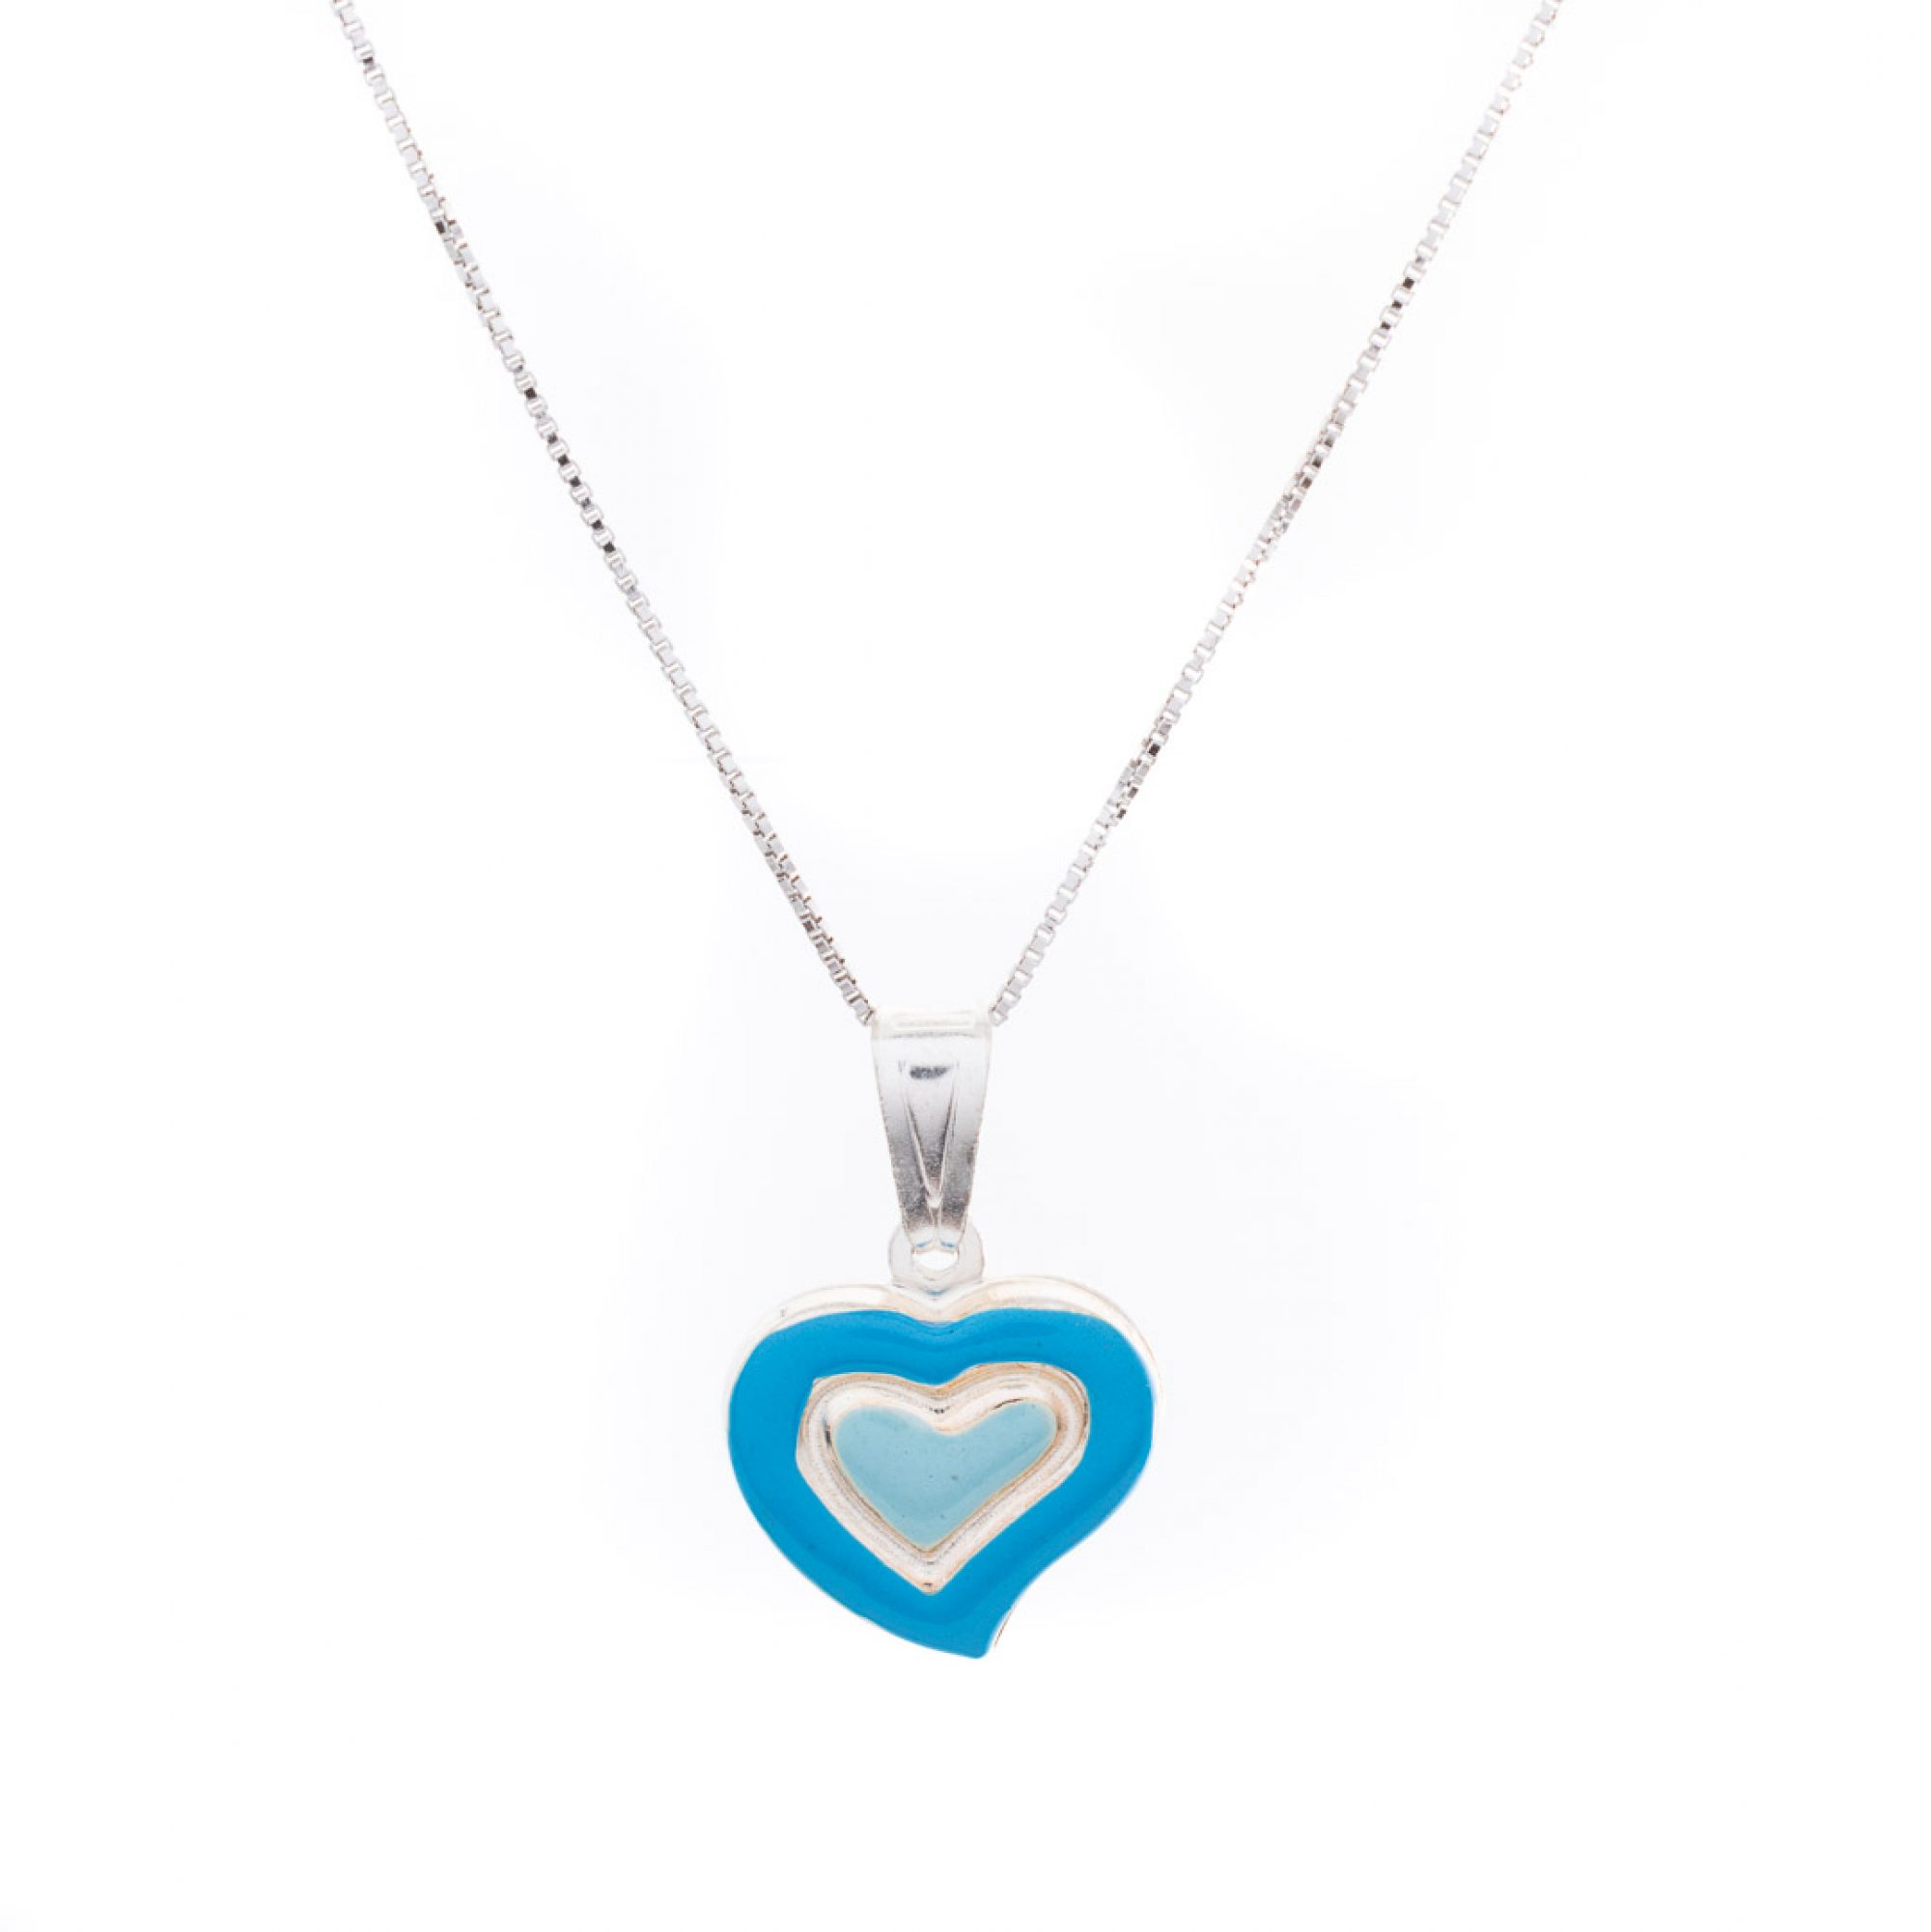 Heart necklace with enamel